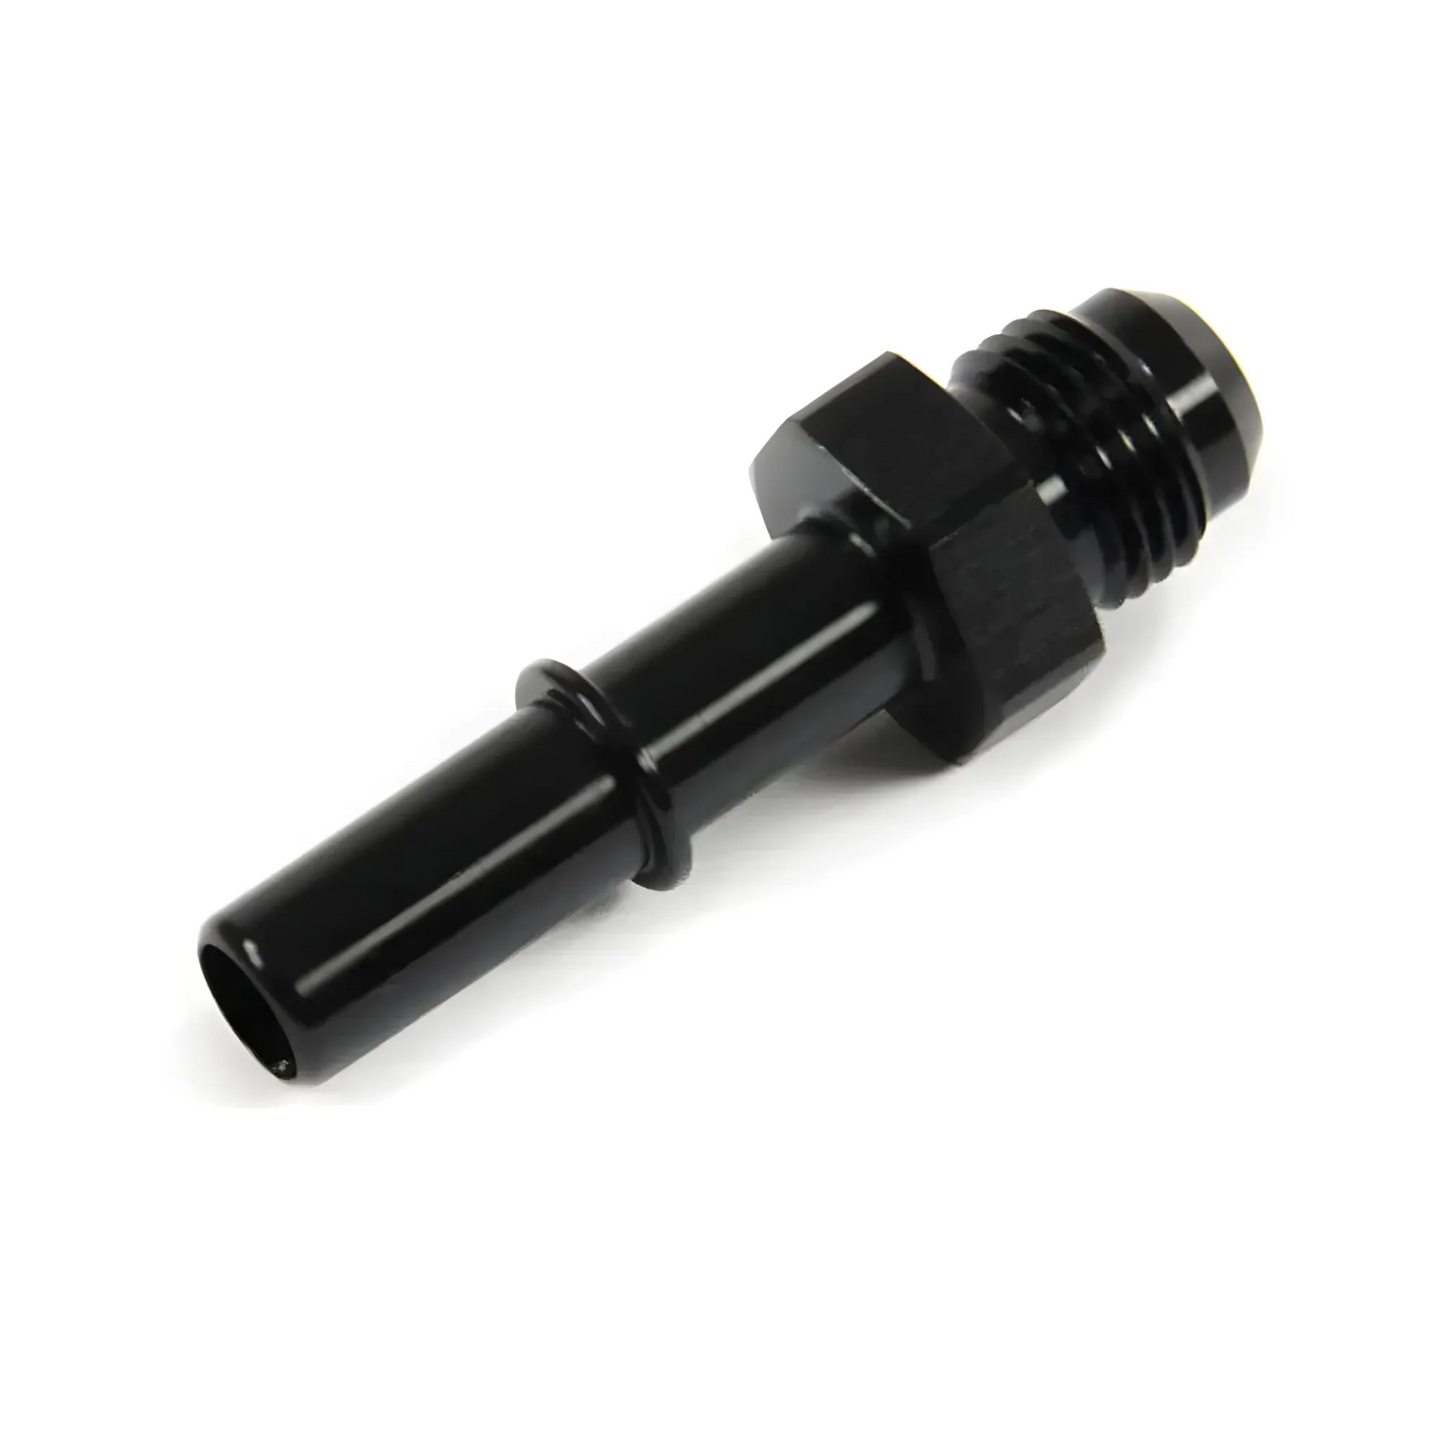 Nitrous Outlet 6AN x 3/8" Spring Lock Fuel Adapter - Male/Male